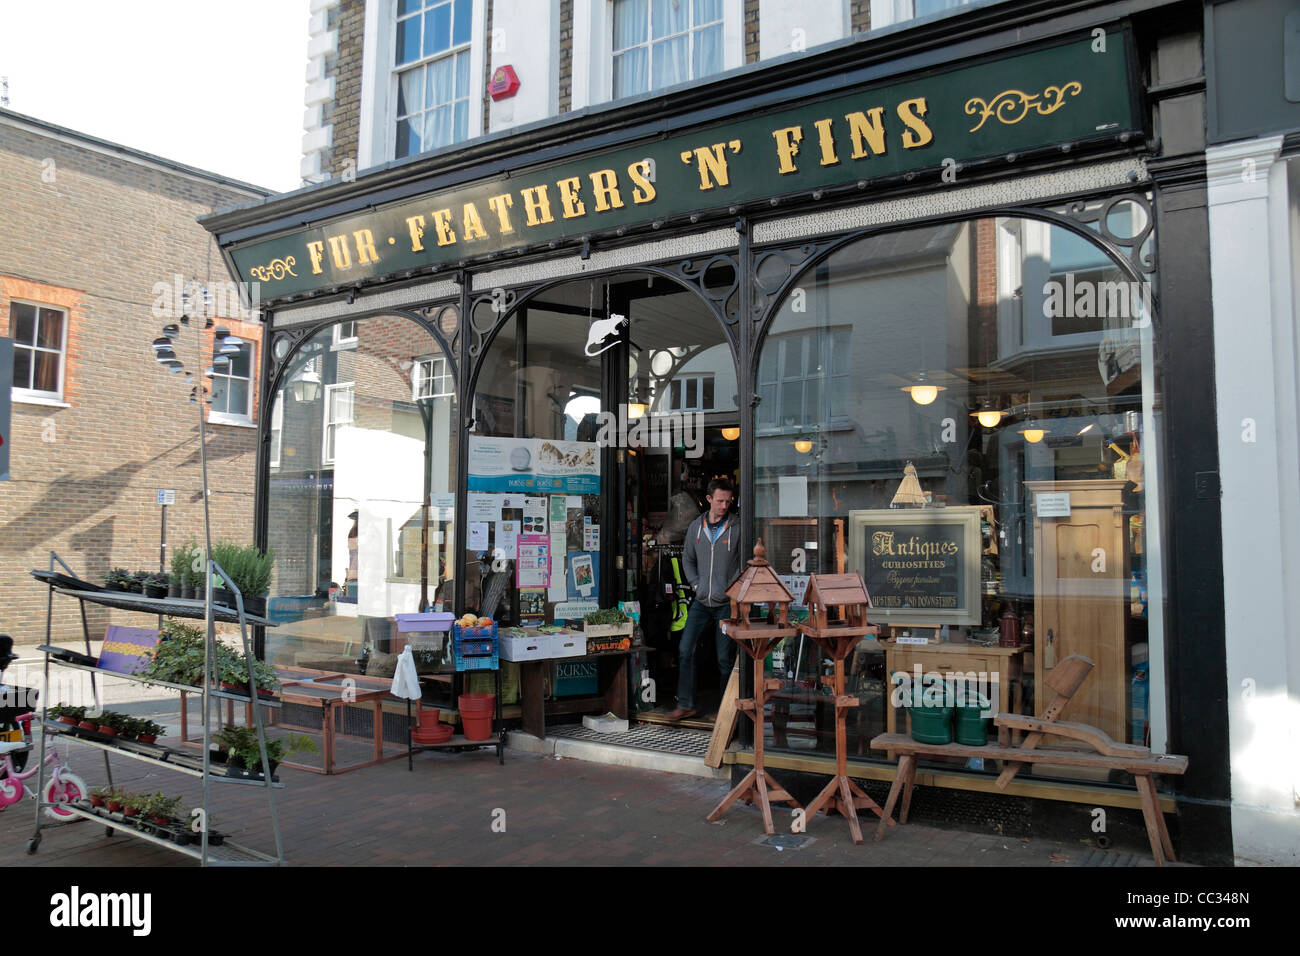 'Fur Feathers 'N' Fins' antique shop on Cliffe High Street, Lewes, East Sussex, UK. Stock Photo